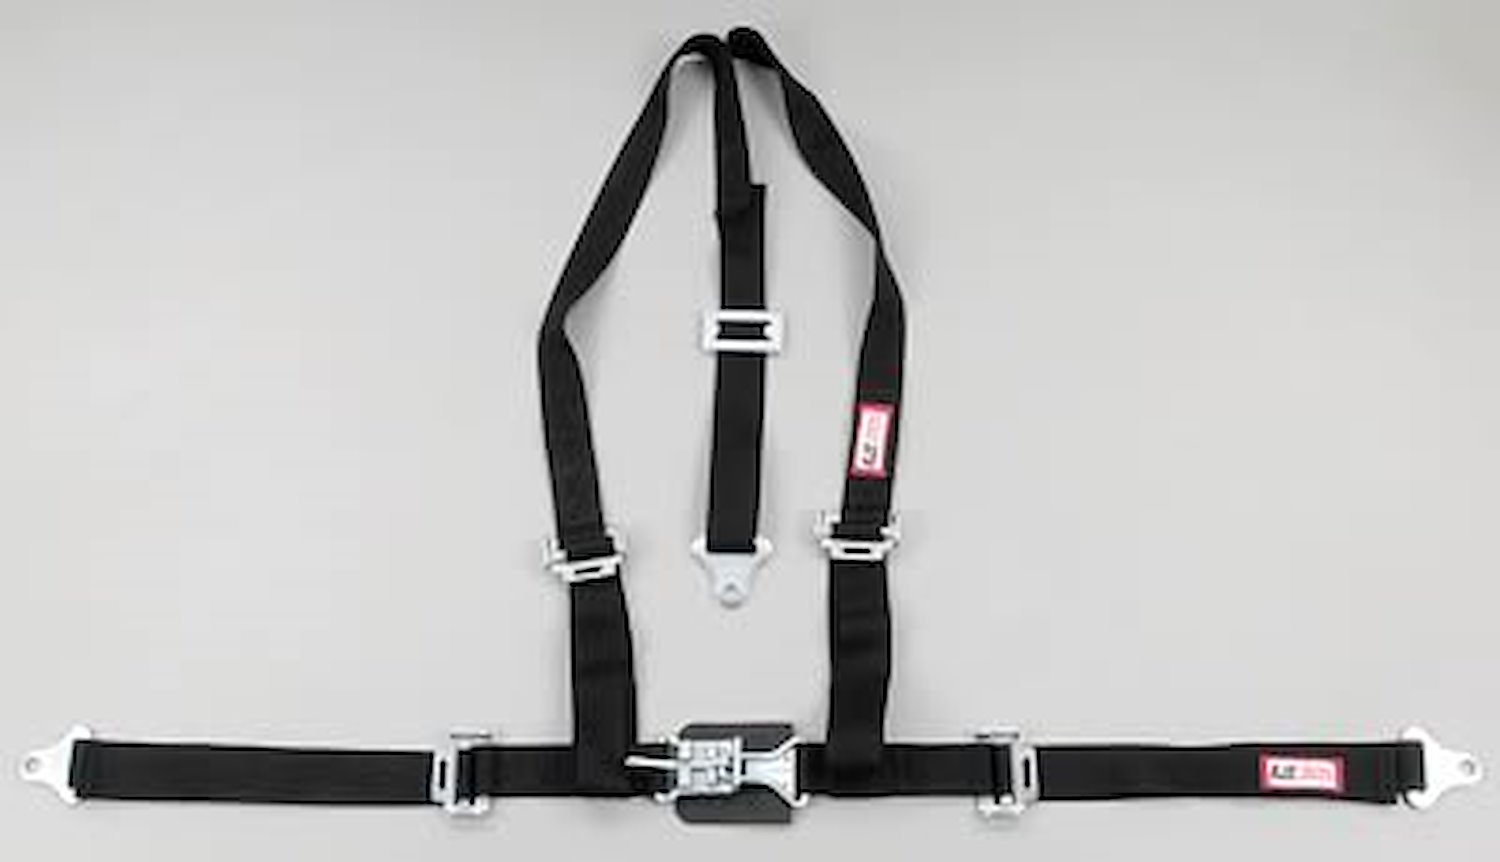 NON-SFI L&L HARNESS 3 PULL DOWN Lap Belt SNAP SEWN IN 2 S.H. Individual ROLL BAR Mount w/STERNUM STRAP WRAP/SNAP BLACK